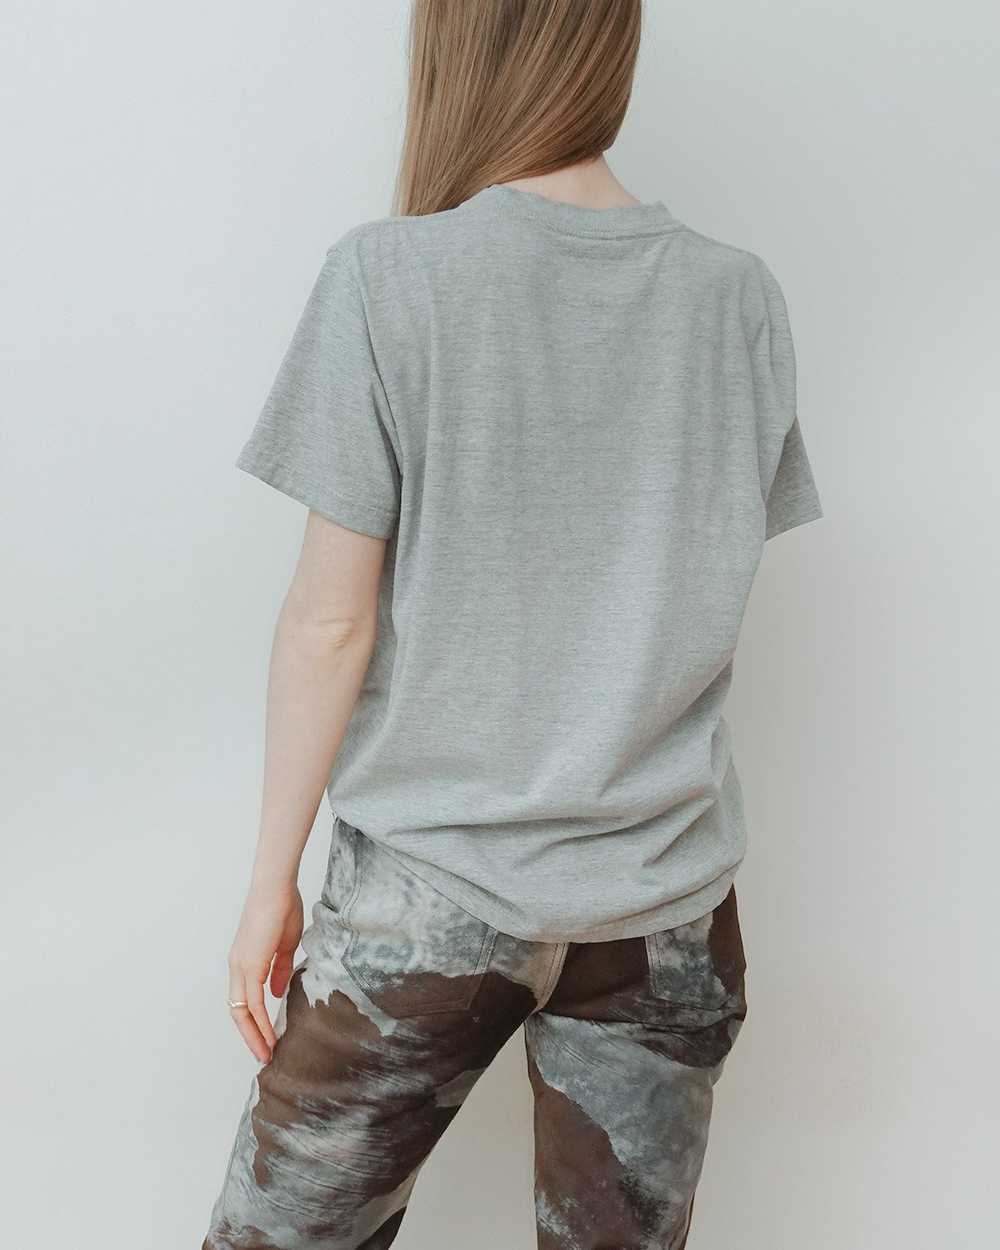 Grey and Navy NYC Collegiate Tee - image 2